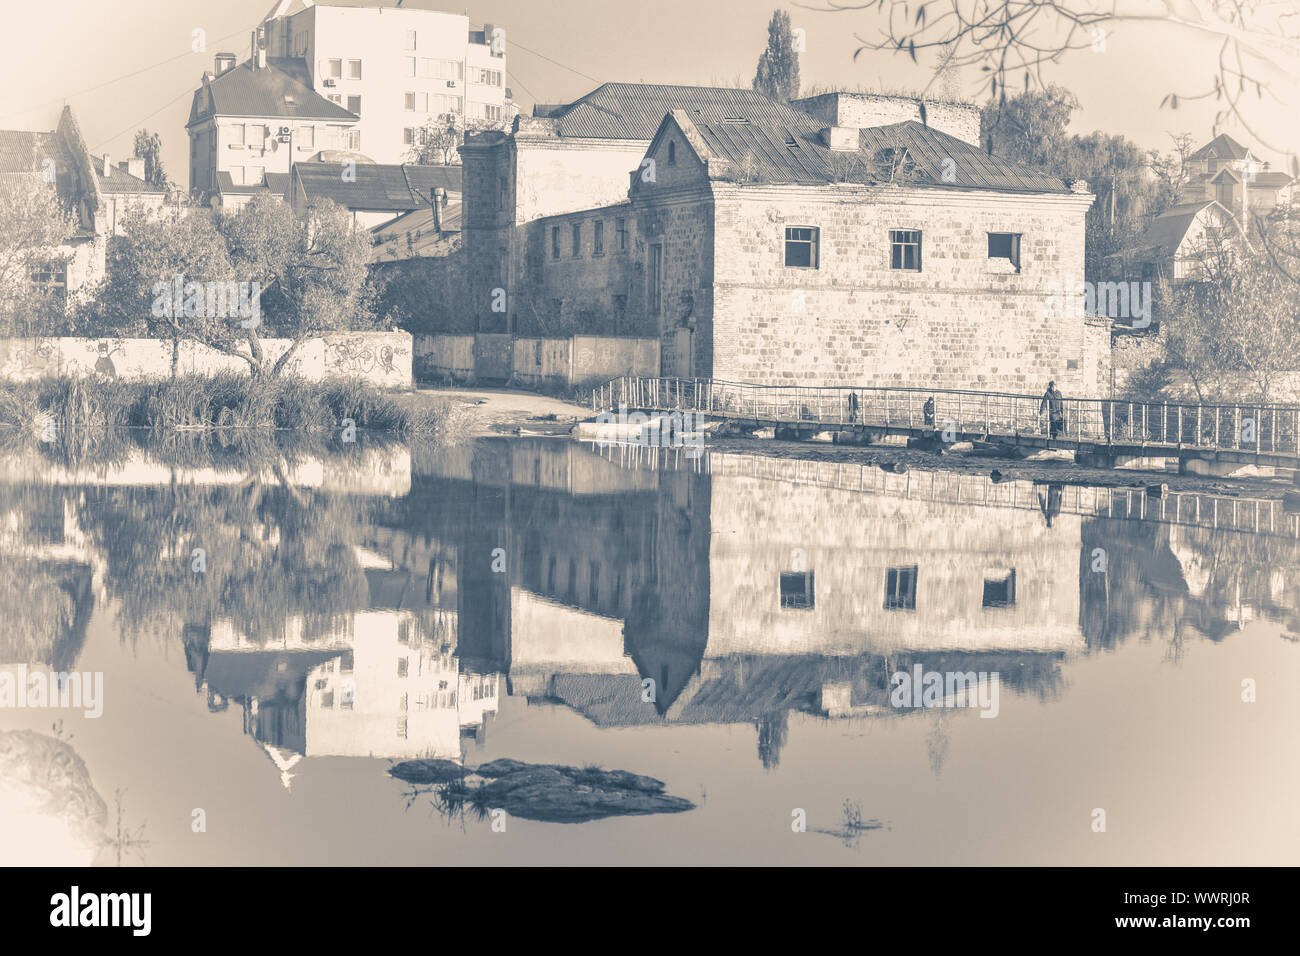 Old vintage photo. Old brick building, river with smooth surface. Mirror reflection. Urban landscape. City landscape Stock Photo